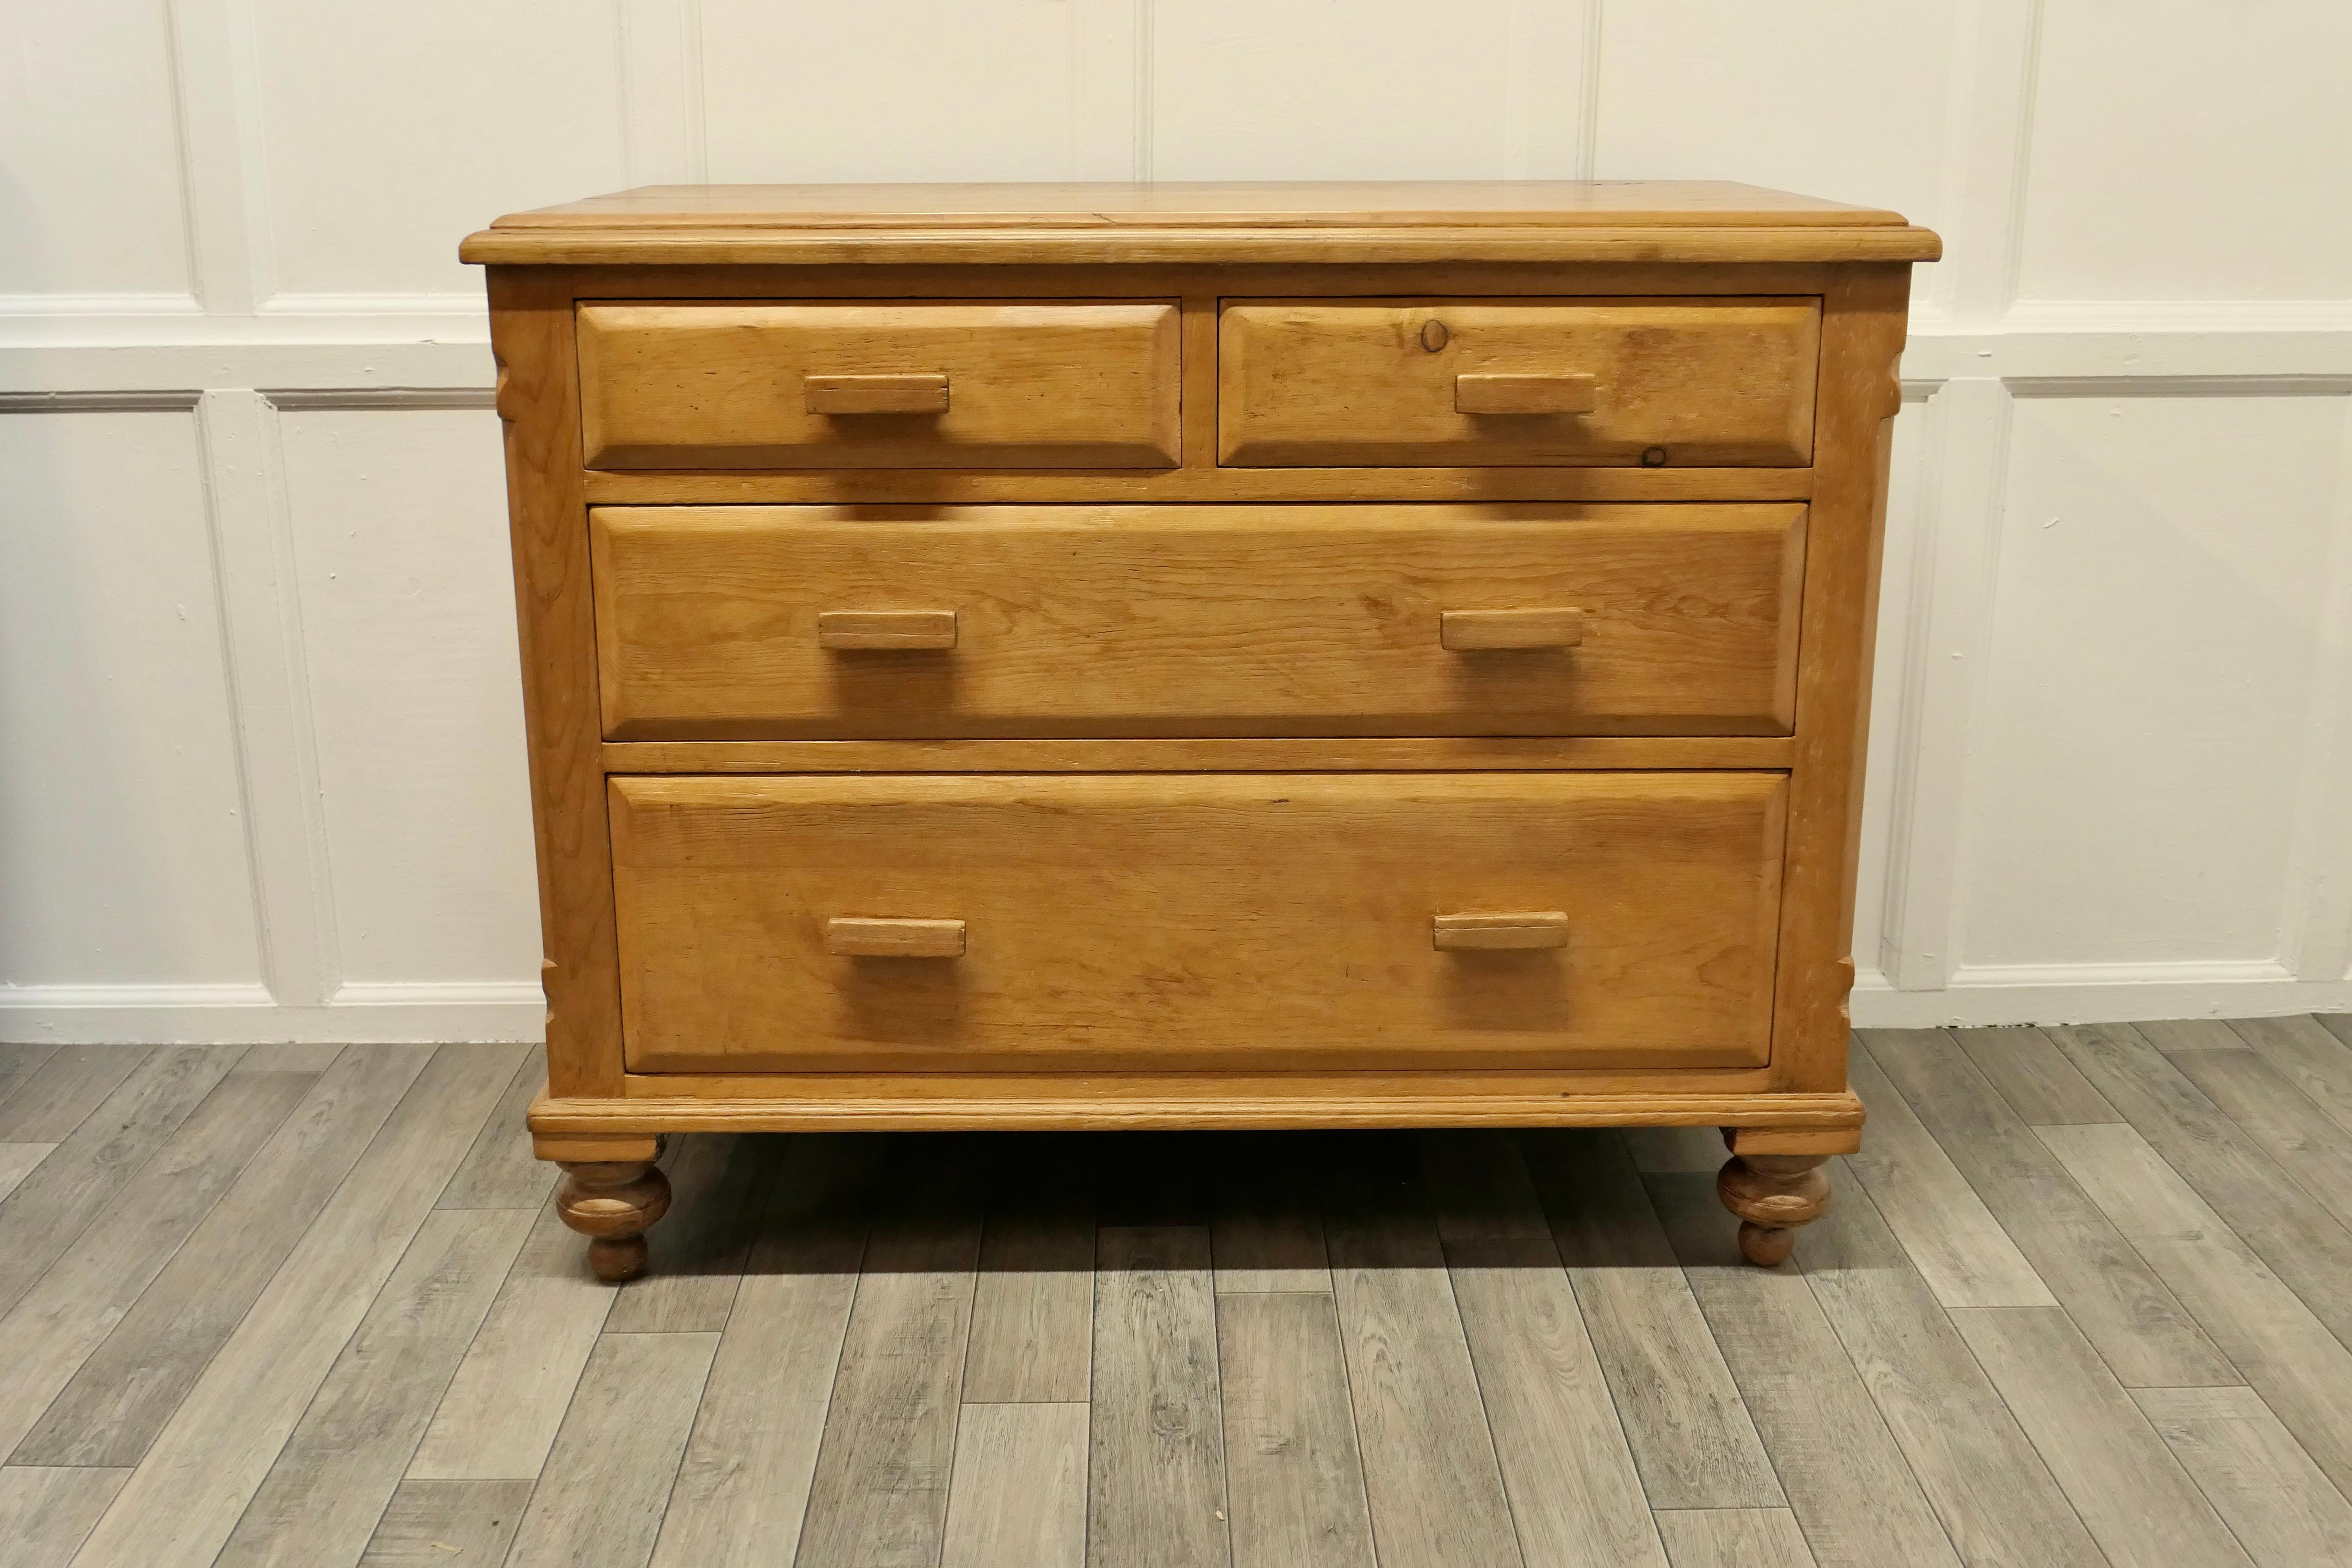 Victorian Stripped Pine Chest of drawers

A Victorian Pine Chest of Drawers, stripped and hand waxed.
The top of the chest has a rounded edge it has two short drawers at the top and two longer graduated drawers beneath, the chest stands on chunky